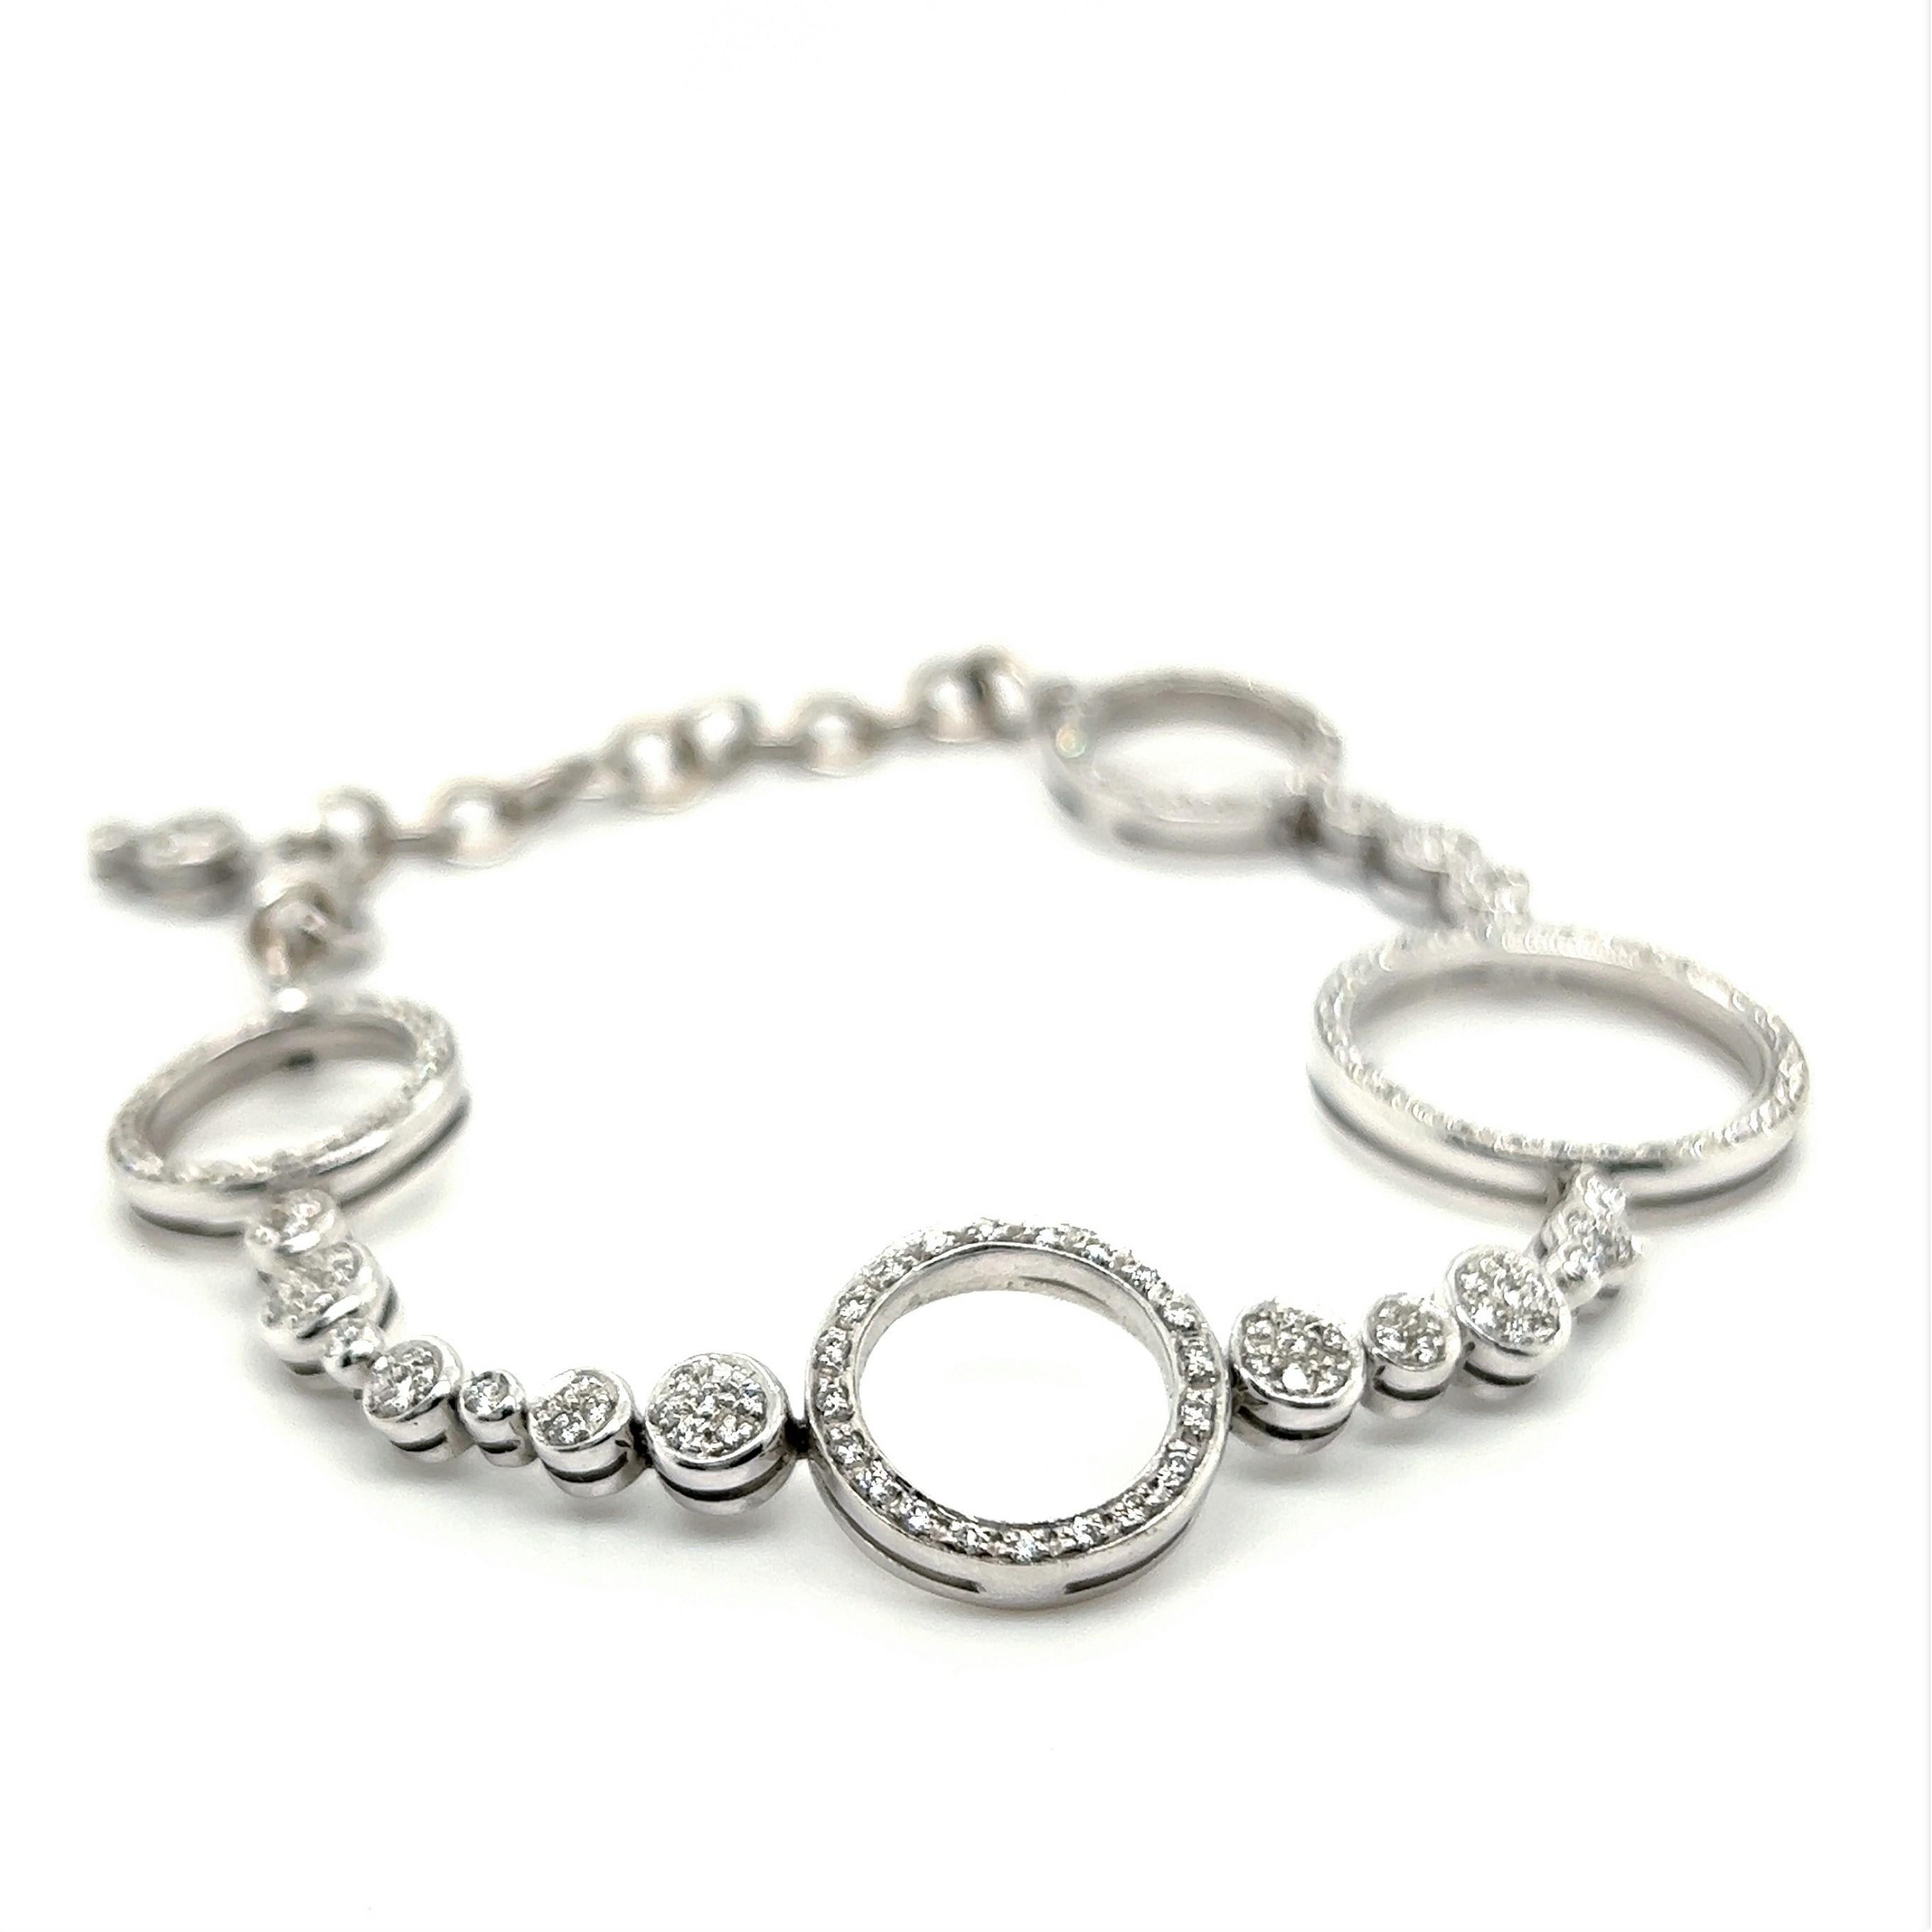 This amusing bracelet is both classic and extraordinaire. Reminiscent of the bubbles of champagne, its charming design brightly sparkles with a fine scattering of diamonds. 

The bracelet is made of 18K white gold and set with brilliant-cut diamonds